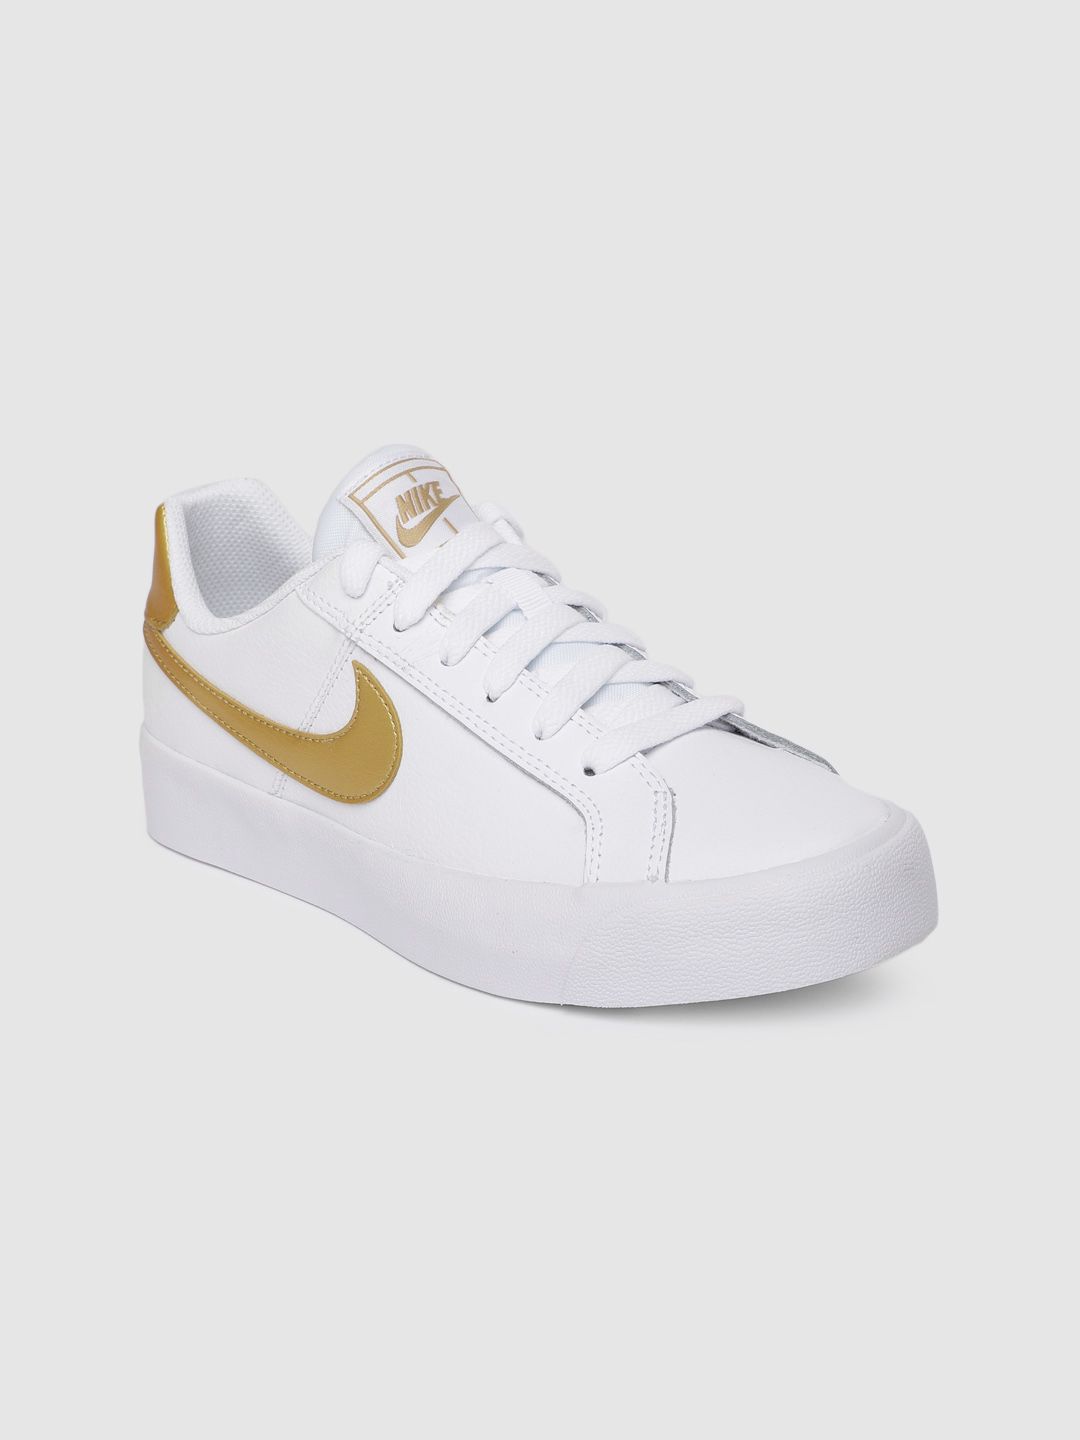 Nike Women White Court Royale AC Leather Tennis Shoes Price in India